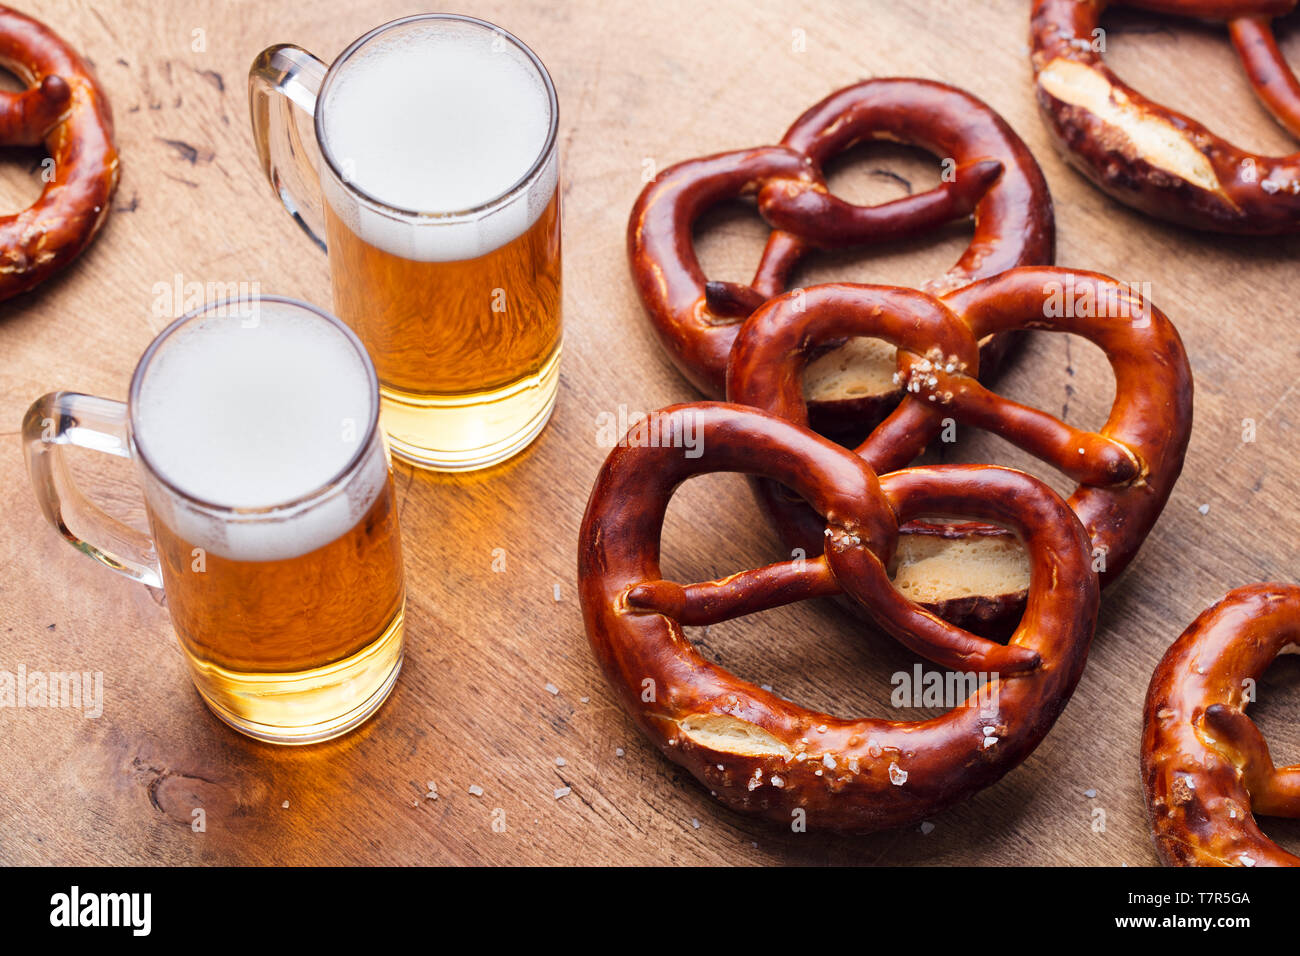 Beer and salted pretzels on wooden table background. Close up. Stock Photo